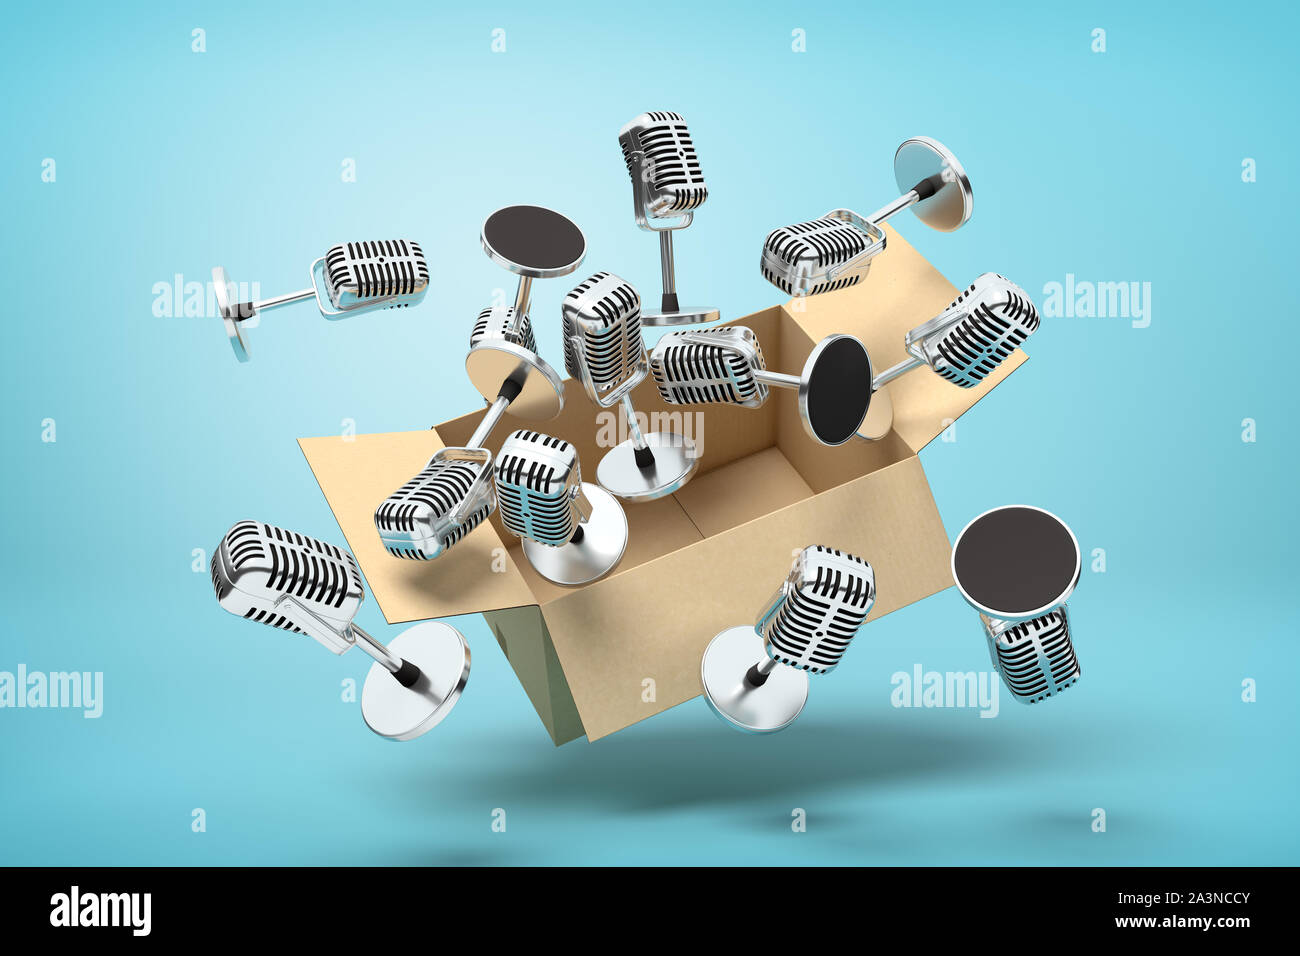 3d rendering of cardboard box suspended in air full of microphones which are flying out on light-blue background. Stock Photo